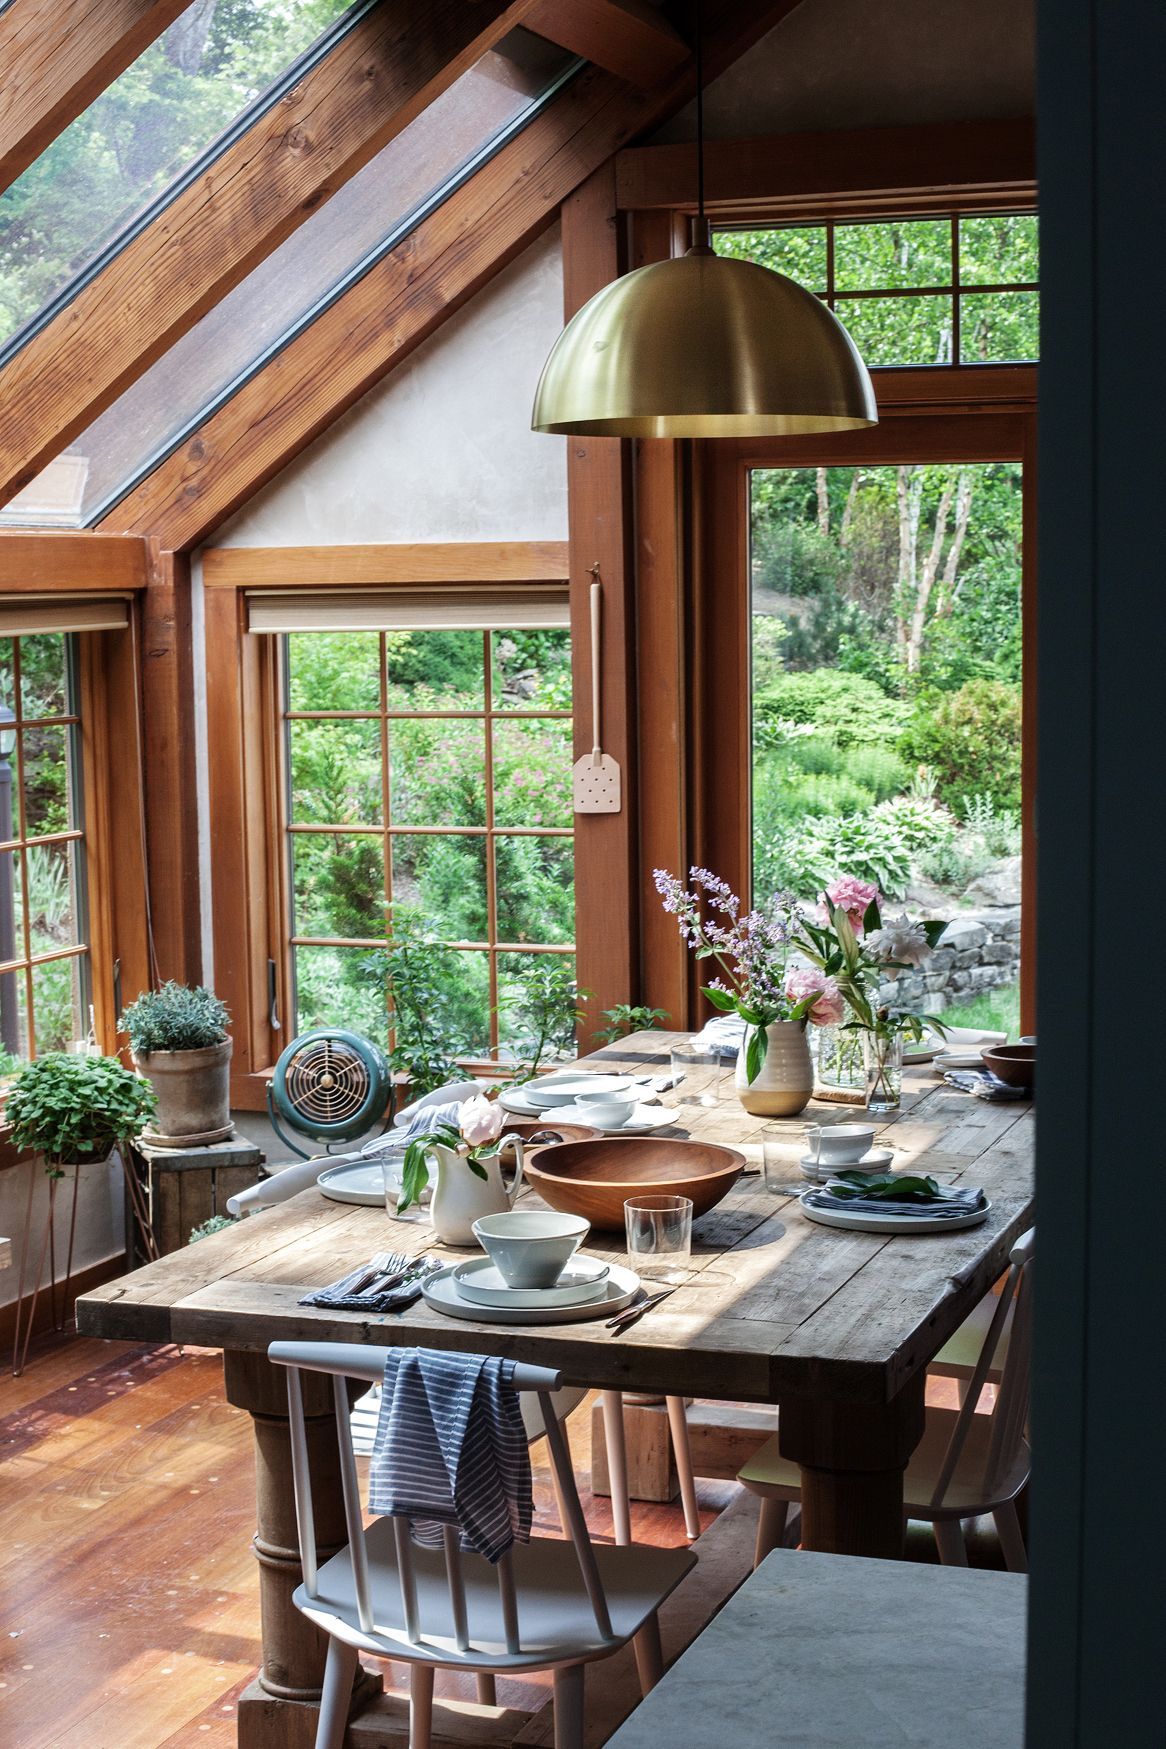 A brass pendant light over the farm table adds a modern touch to this cottage-style sun room. Photo by